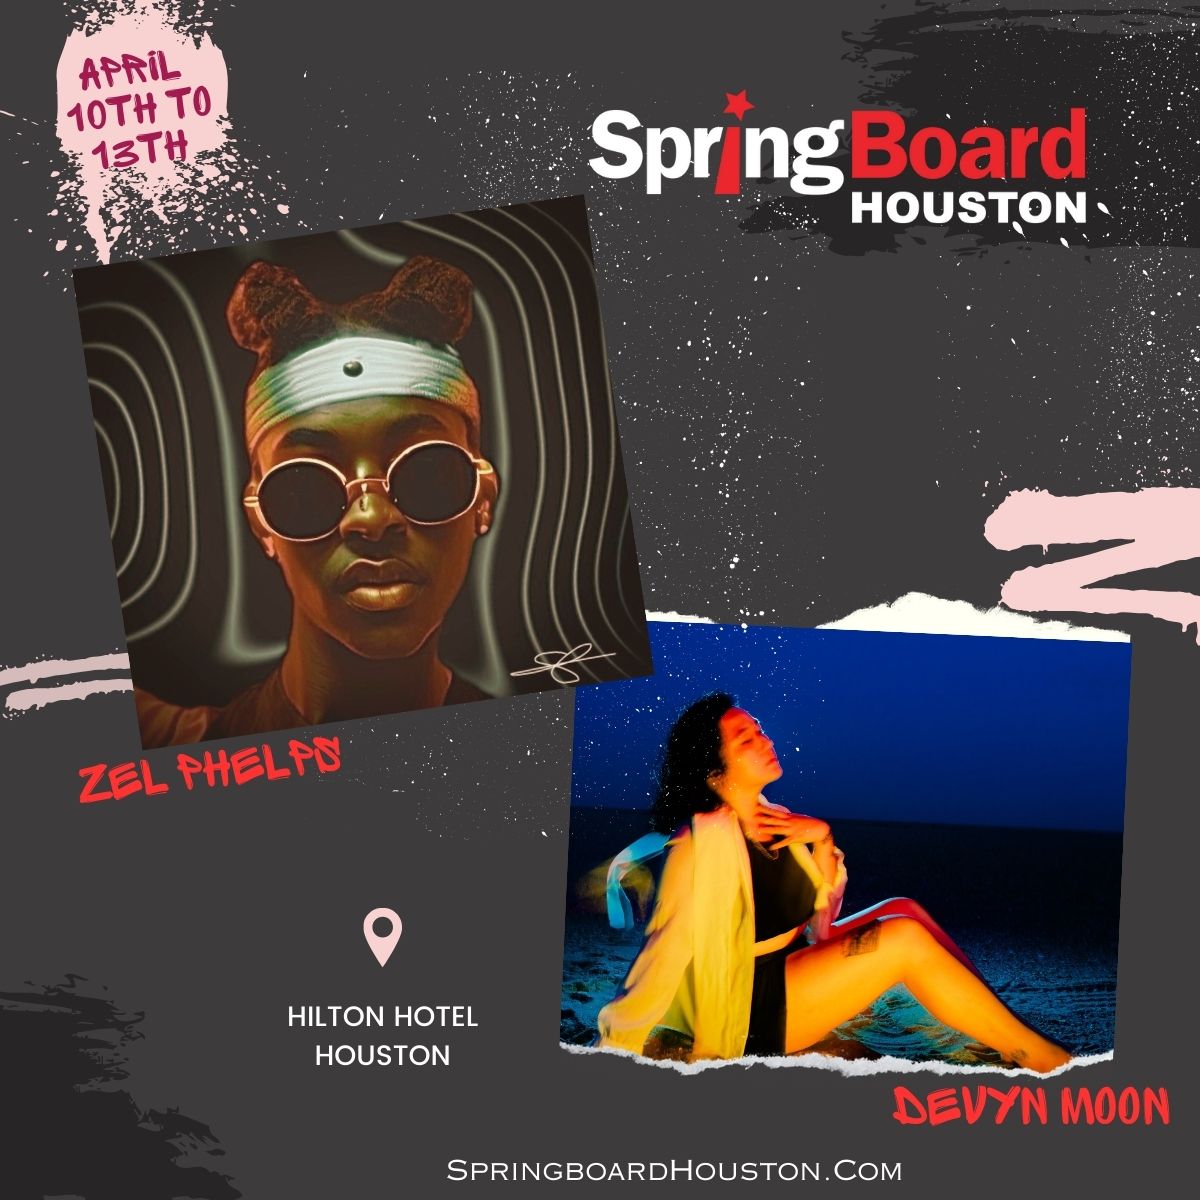 Big Shout out to @zelphelps and @devynmoonn !! Welcome to Springboard Houston 2024!!
#springboardfest #musicfestival #indiemusic #indiemusician #indiemusicians #IndieArtists #indiefestival  #houstontx #houstonmusicscene #houstonlove